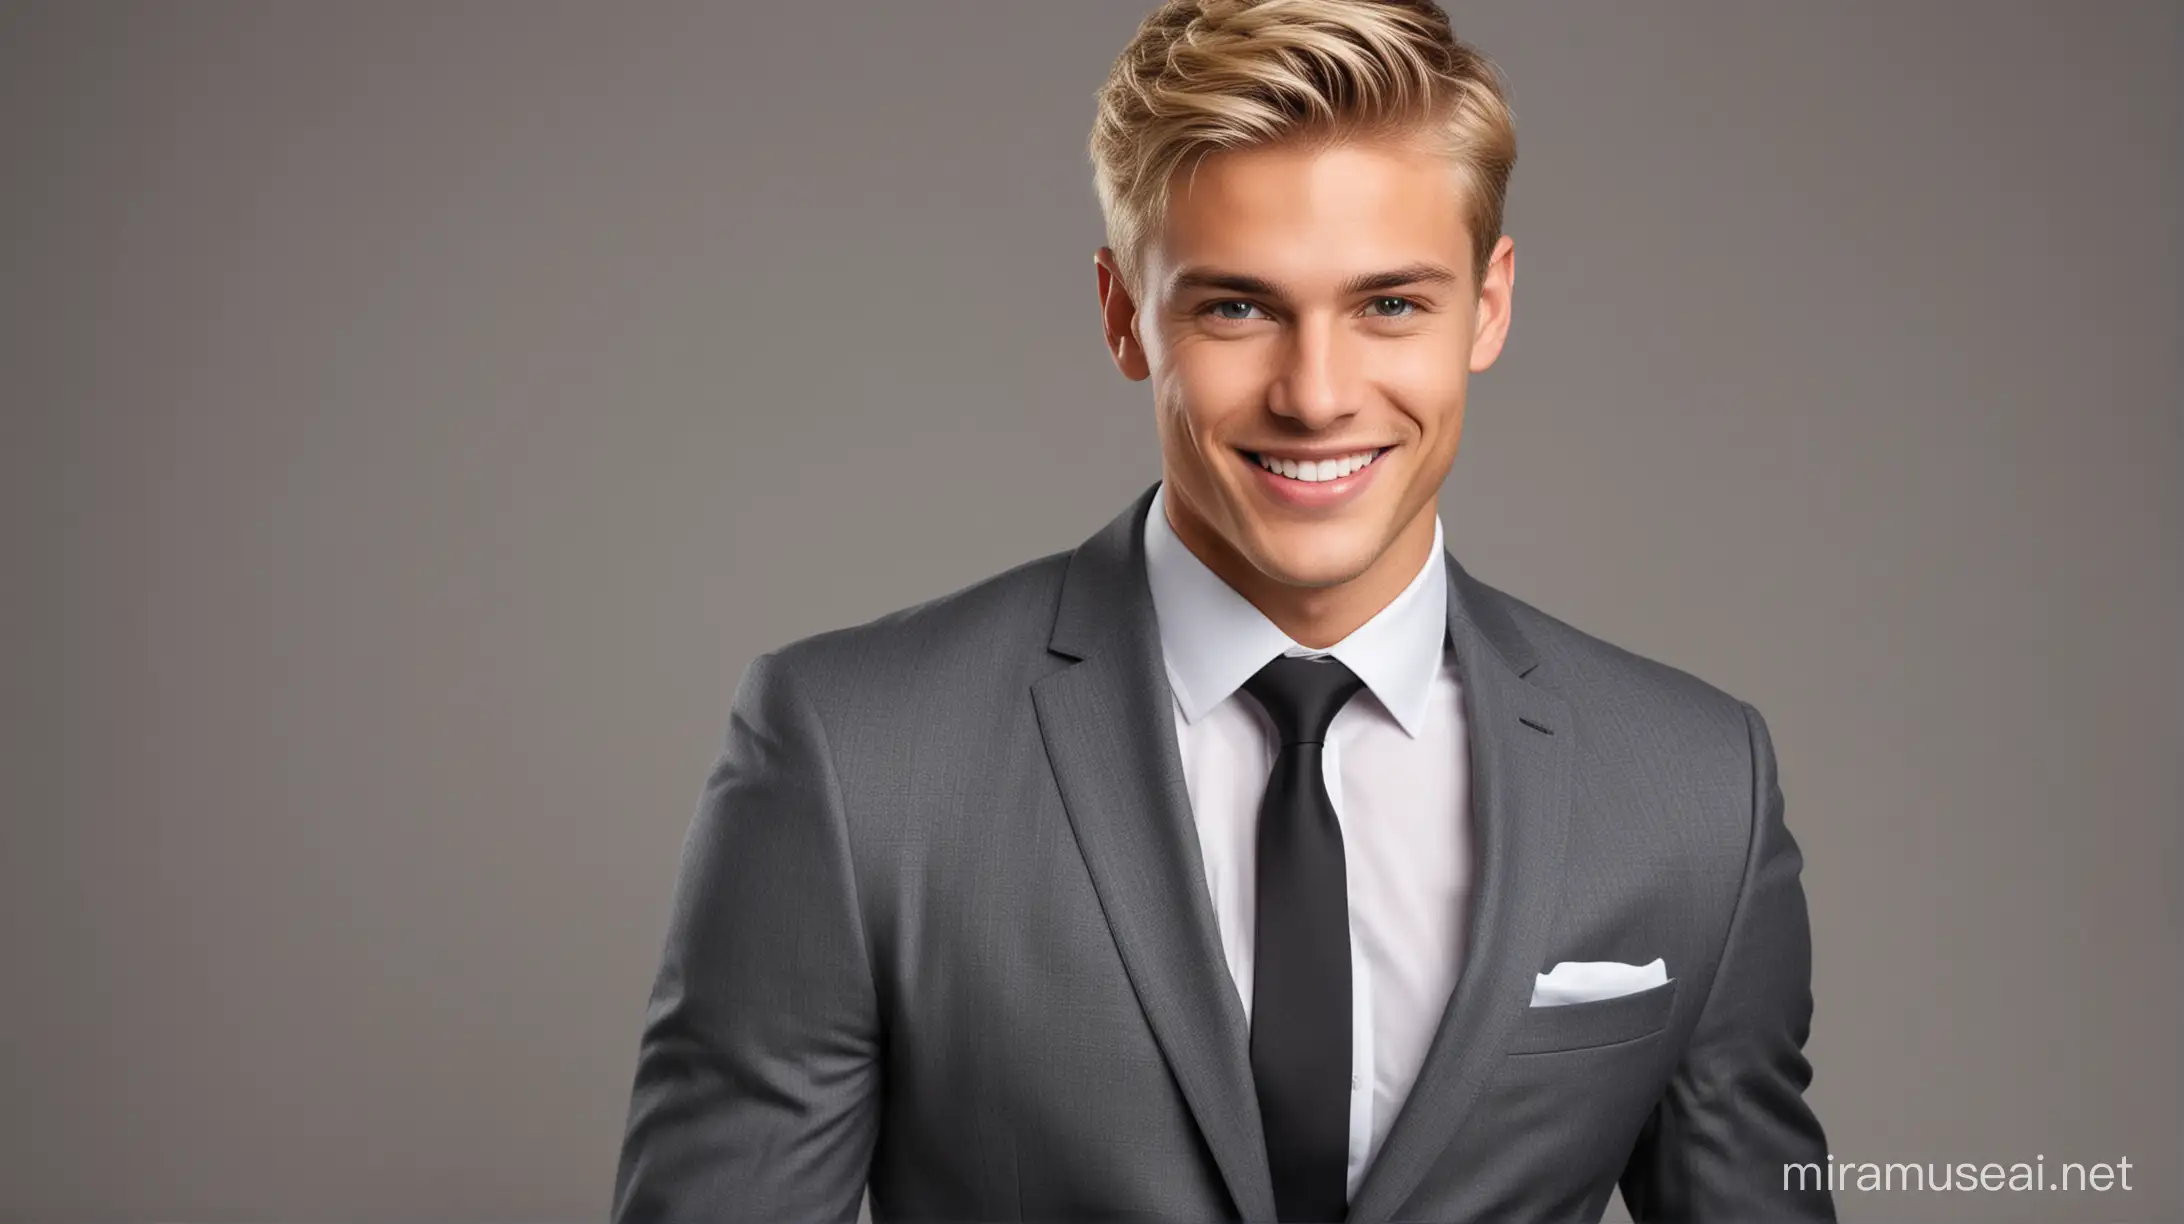 Stylish Smiling Young Man in Modern Charcoal Suit with White Dress Shirt and Contrasting Tie